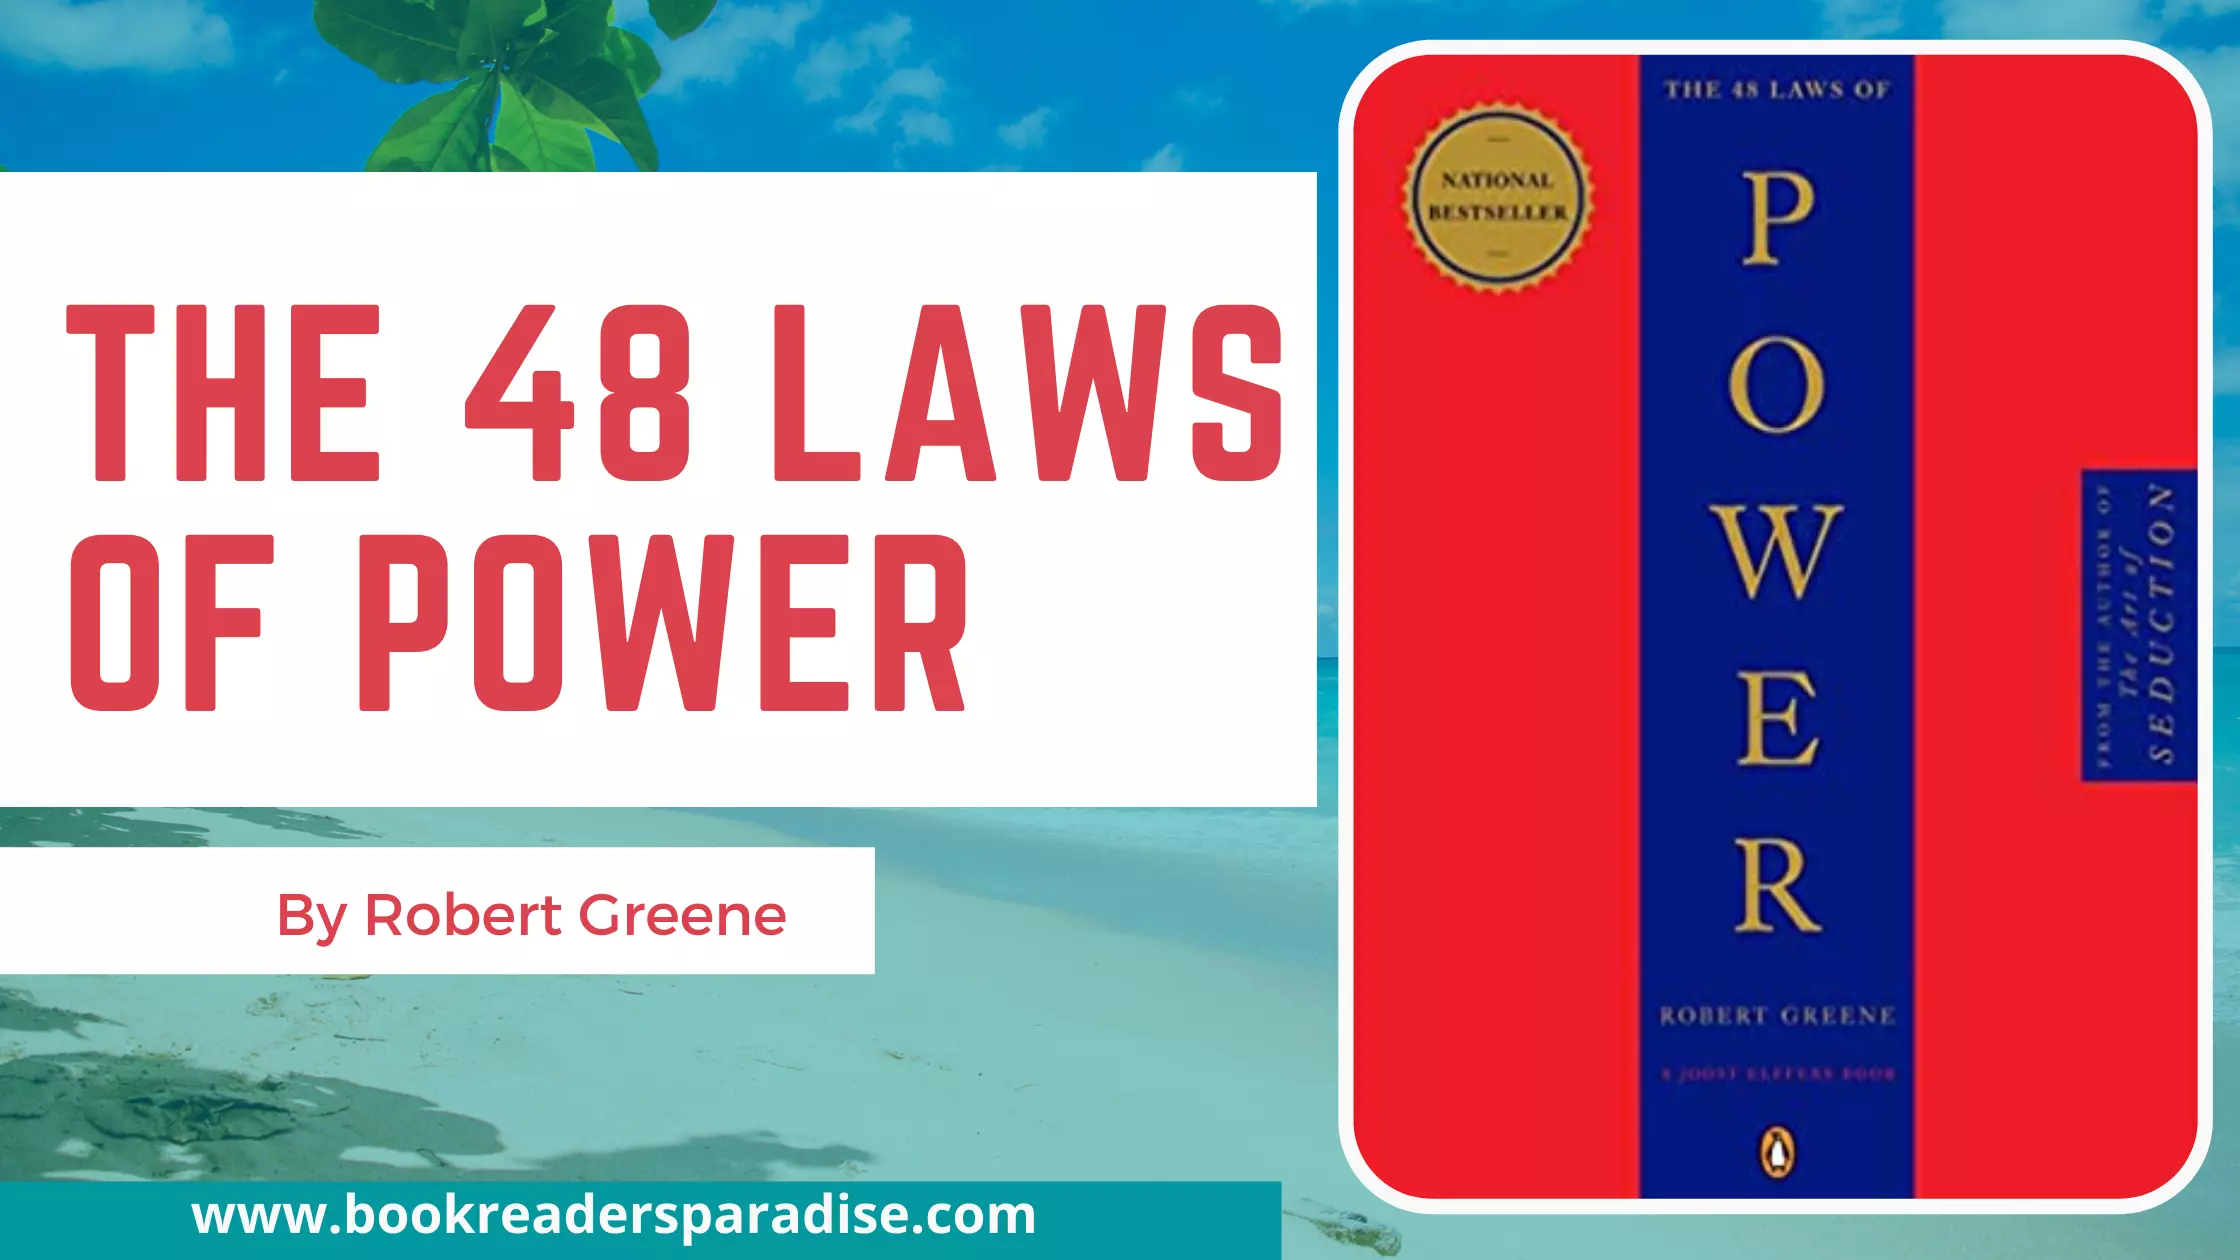 The 48 Laws of Power PDF, Audiobook & Summary Free Download Details